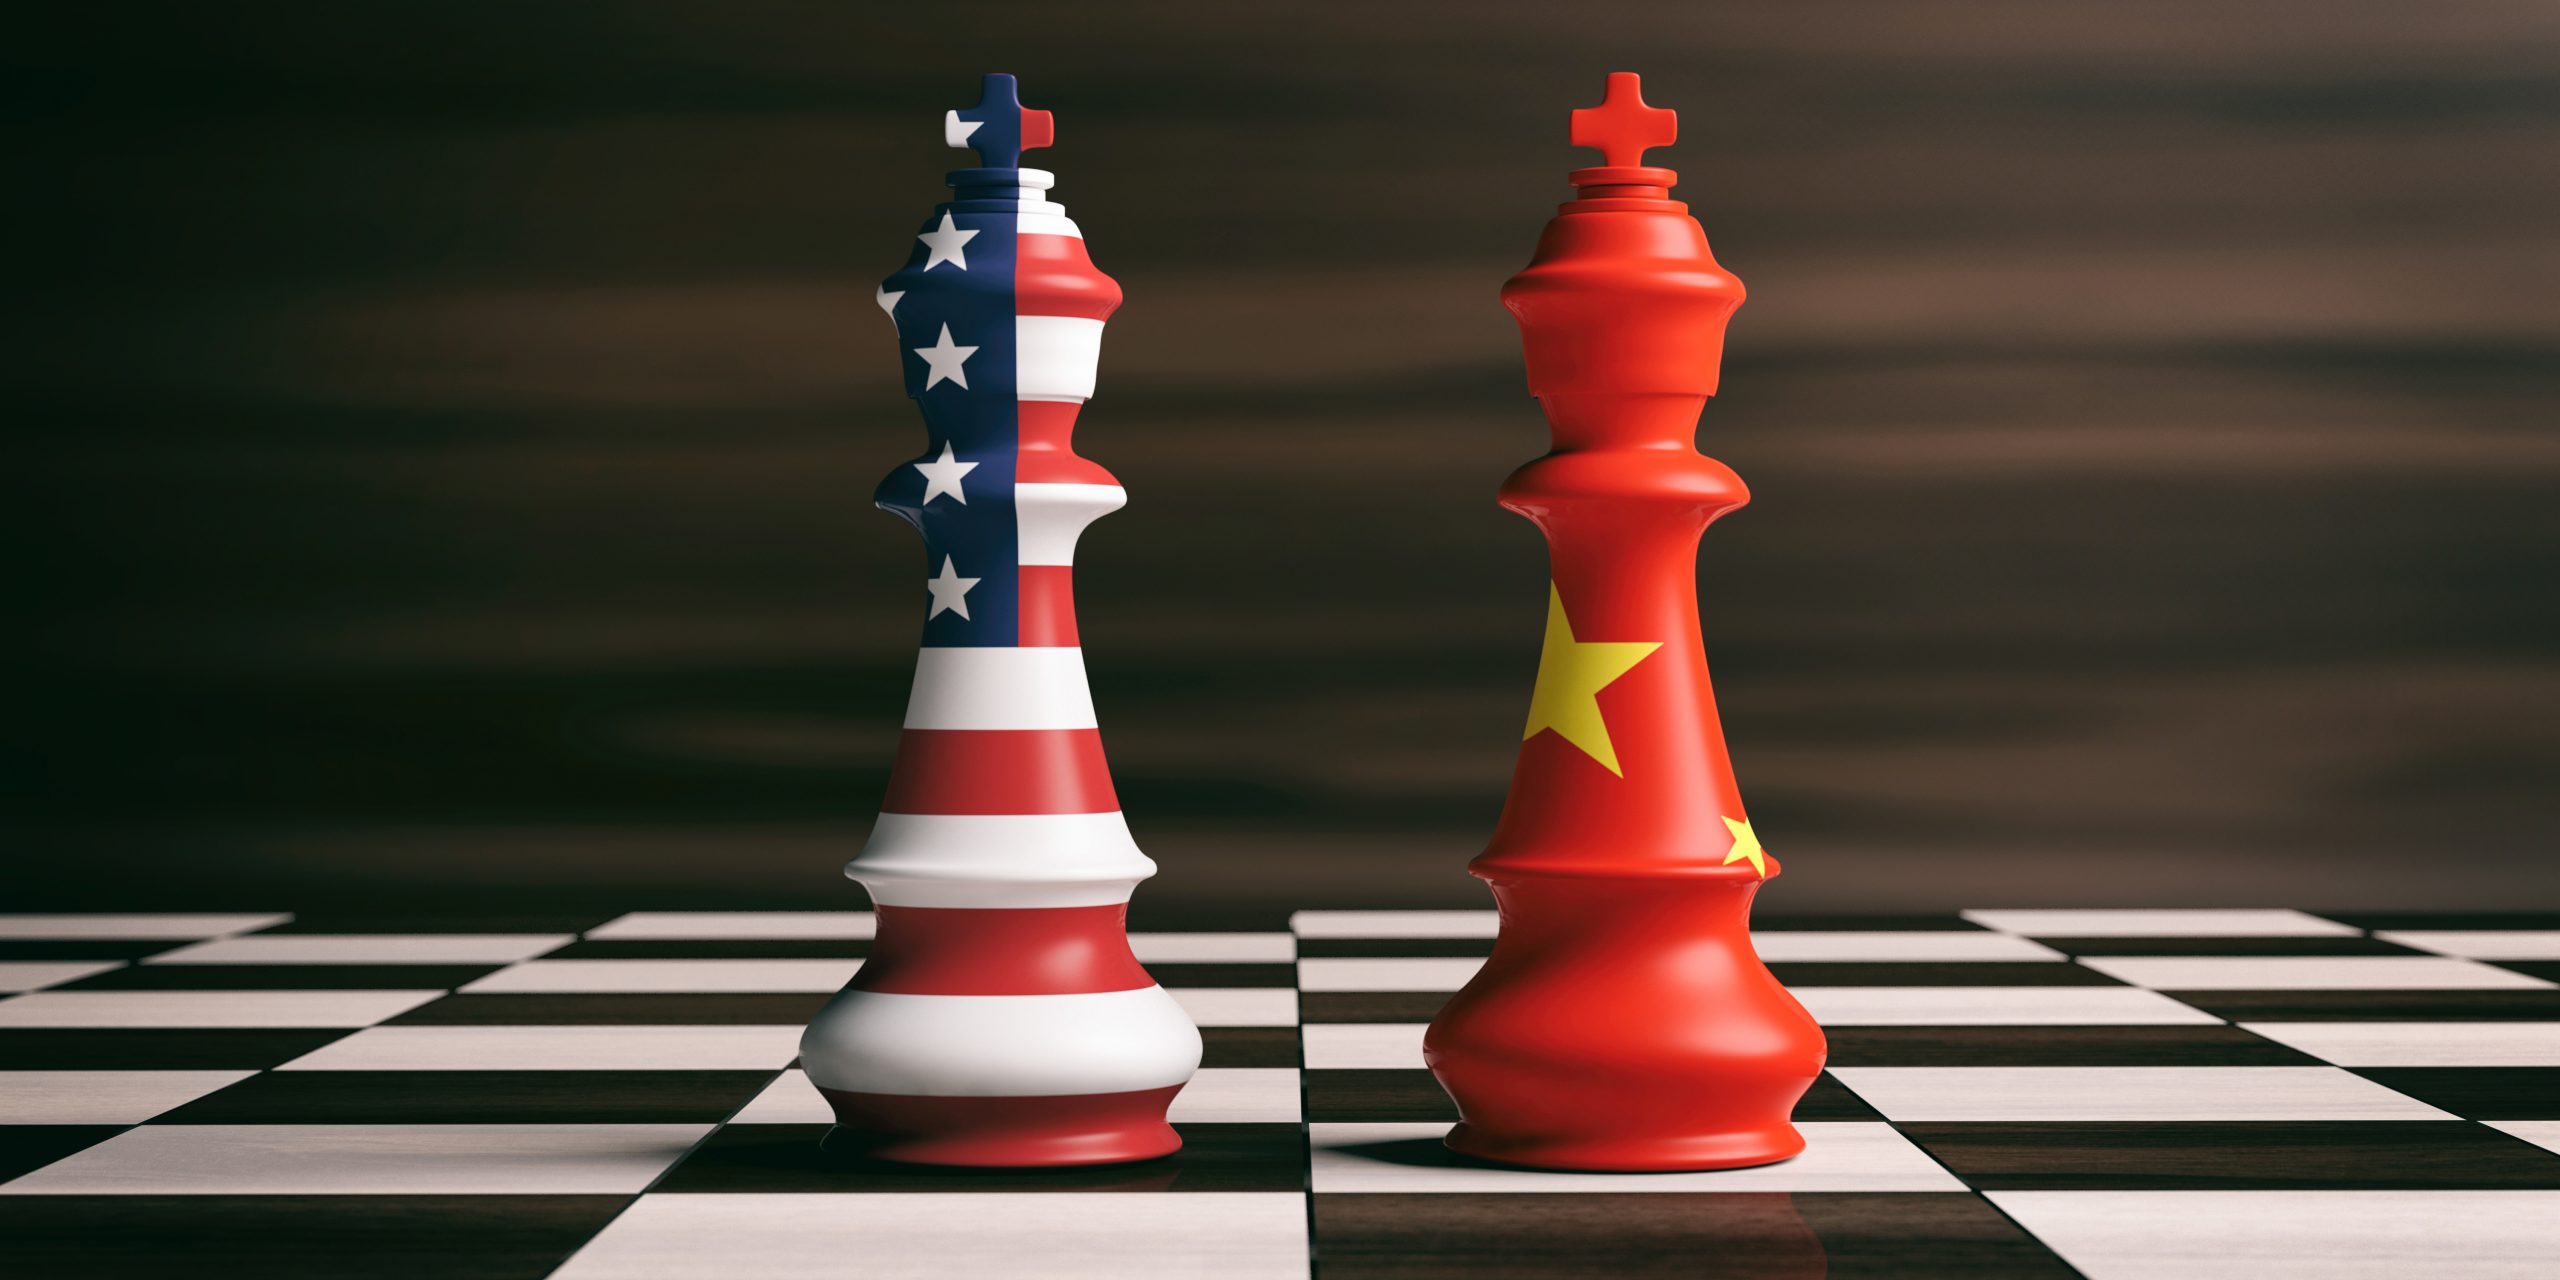 Photo via https://www.shutterstock.com/image-illustration/usa-china-trade-relations-cooperation-strategy-792494194